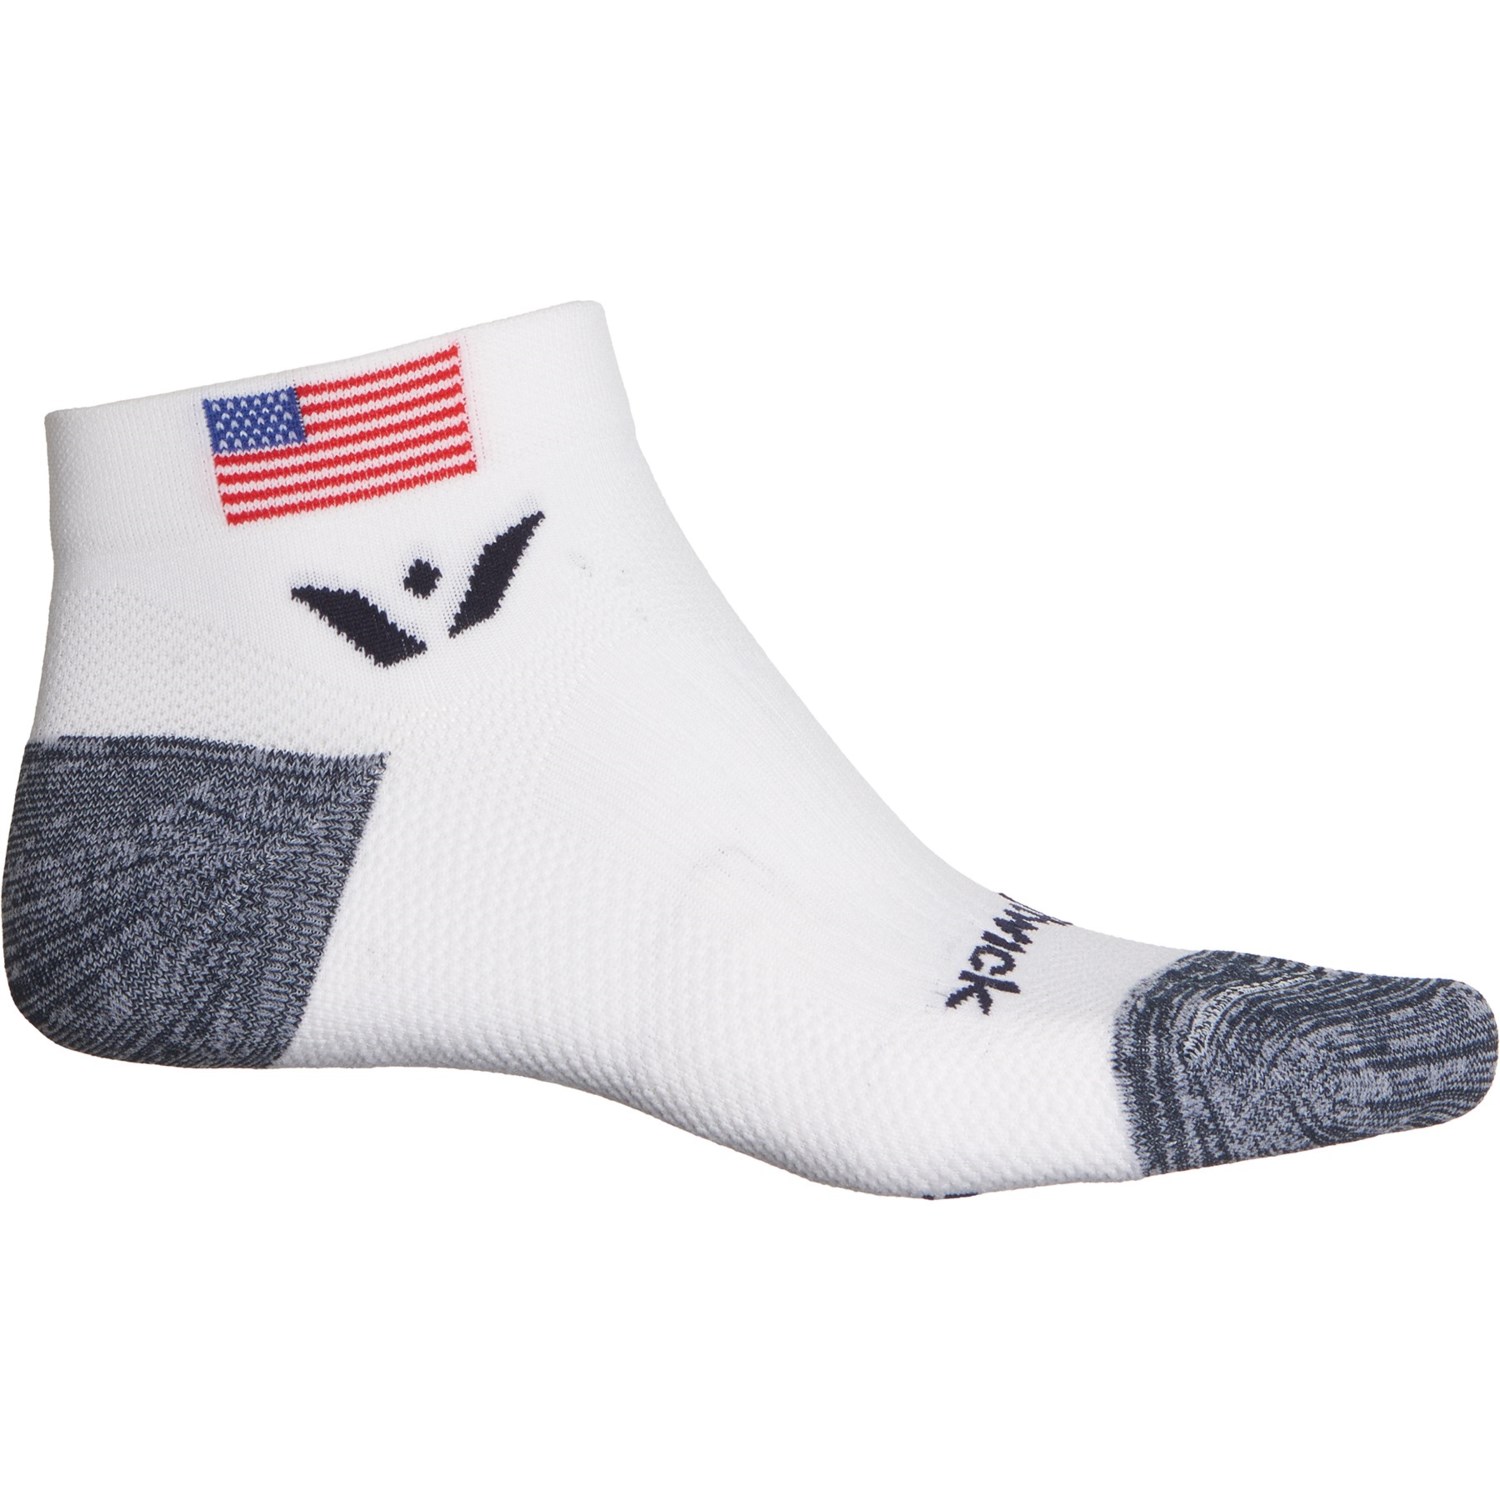 Swiftwick VISION One Tribute Cycling Socks - Ankle (For Men and Women)